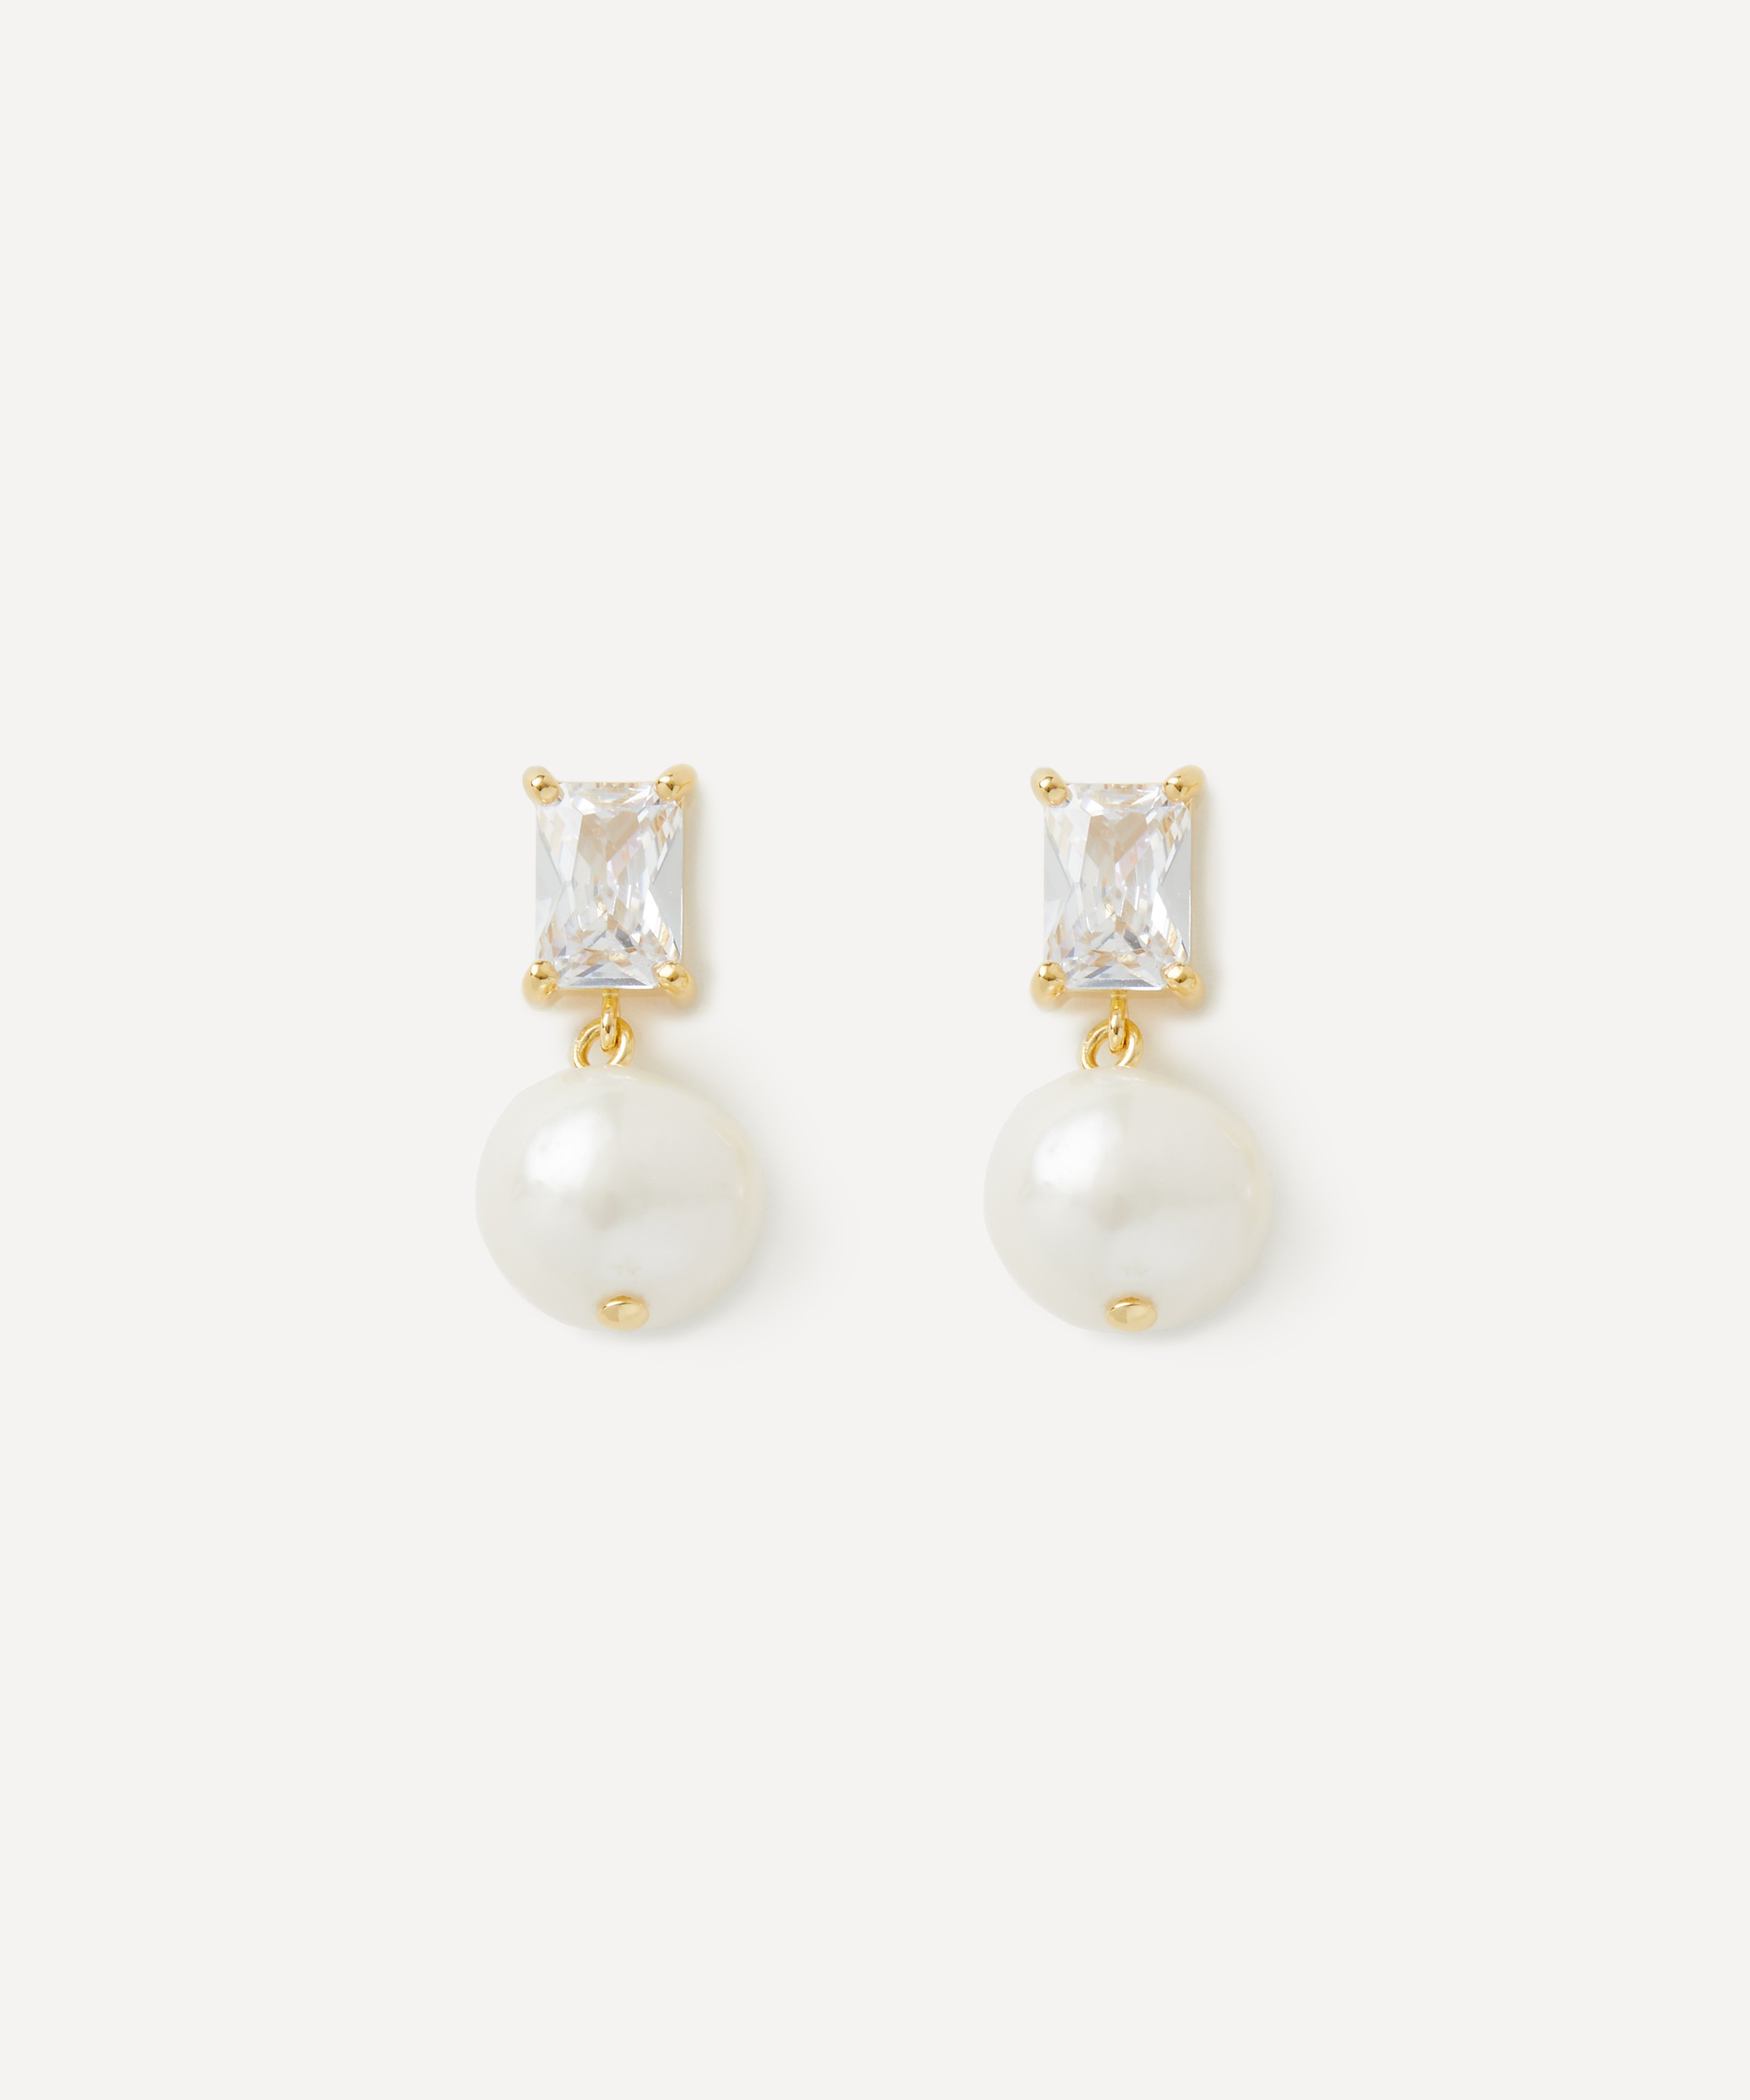 Completedworks - 18ct Gold-Plated Vermeil Silver Concurrence Drop Earrings